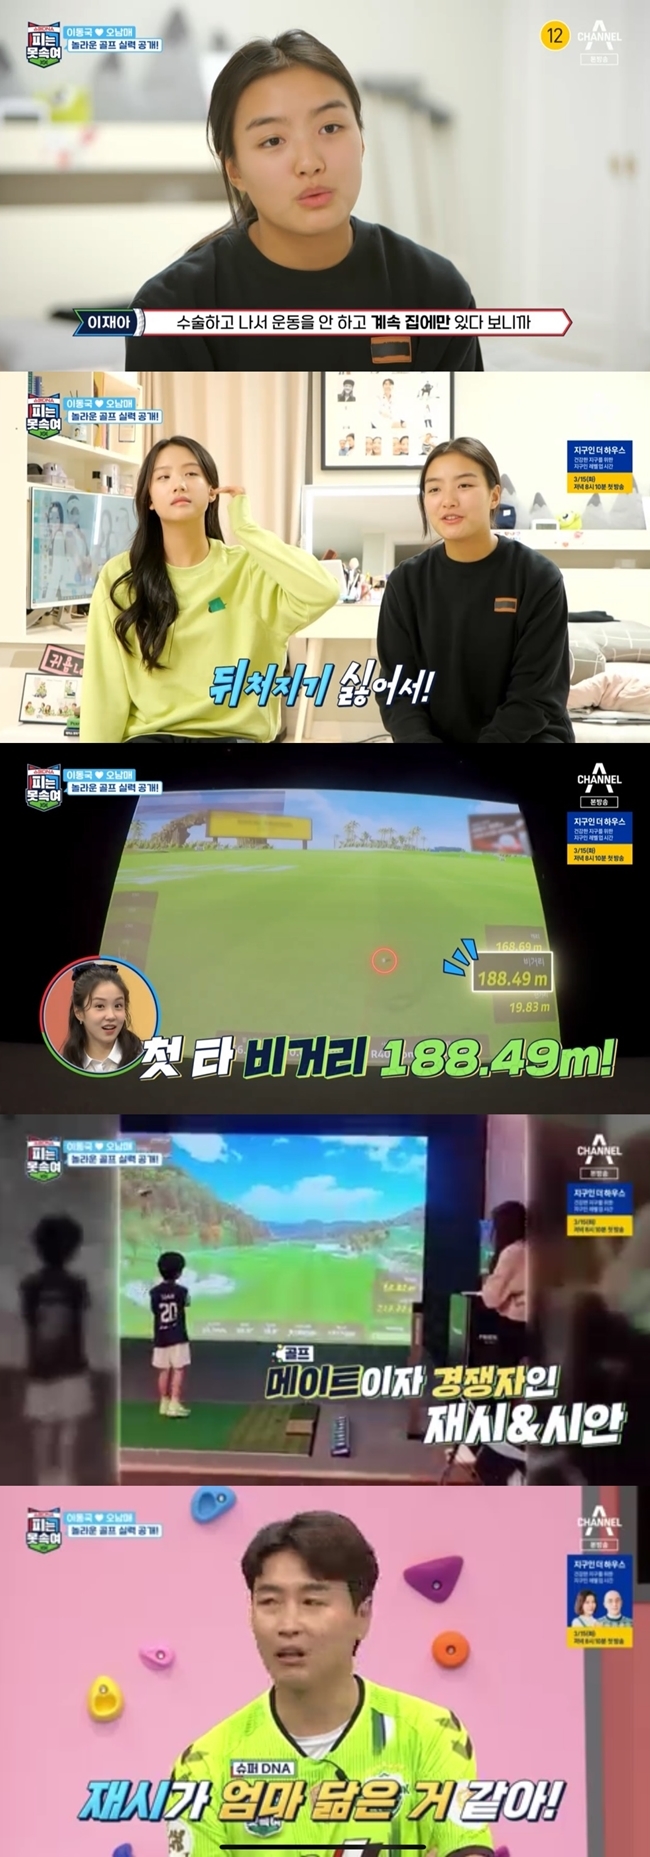 Former footballer Lee Dong-gooks eldest daughter Jash has also been gifted in golf.Channel A, which aired on March 14, depicted Lee Dong-gook and Five Brothers & Sisters routines in Super DNA Blood Cant False.Five Brothers -- The place where Sisters were captured is a screen golf course. Lee Jae-a, who suffered a leg injury, said, I was frustrated when I was working out and staying at home.I saw Jash, Sua, SuA, and Xian playing golf, but he was really good. He said, I started putting because I did not want to be behind. Lee Dong-gook explained, Jaa played tennis and did not play golf lessons a few times; the rest of the re-show, Sua, SuA and Xian are learning golf.Jash boasted a high-quality golf ability by hitting the first distance of 188m and 200m.Lee Dong-gook expressed his pride that Jash seems to be RR because it resembles his mother, and Kang Ho-dong also said, It is inherently genius.The first runner, Jassie, was saved by hitting the first 180 meters, and the team of the Sulsudae was also very good.After a fierce confrontation, Jascias team won. When she lost the game, Xian shed tears. I was annoyed that my sister was disturbed.Lee Dong-gook earlier went on to test his wife, Seolah, SuA, cyan and motor skills DNA.At the time, Dr. Lee Dong-gooks wife, Lee Soo-jin, said, Its a super DNA. R is a dominant factor.It is more of a gold medal gene. Meanwhile, Jash, who said the model was a dream, recently announced his debut in the Paris fashion show runway.